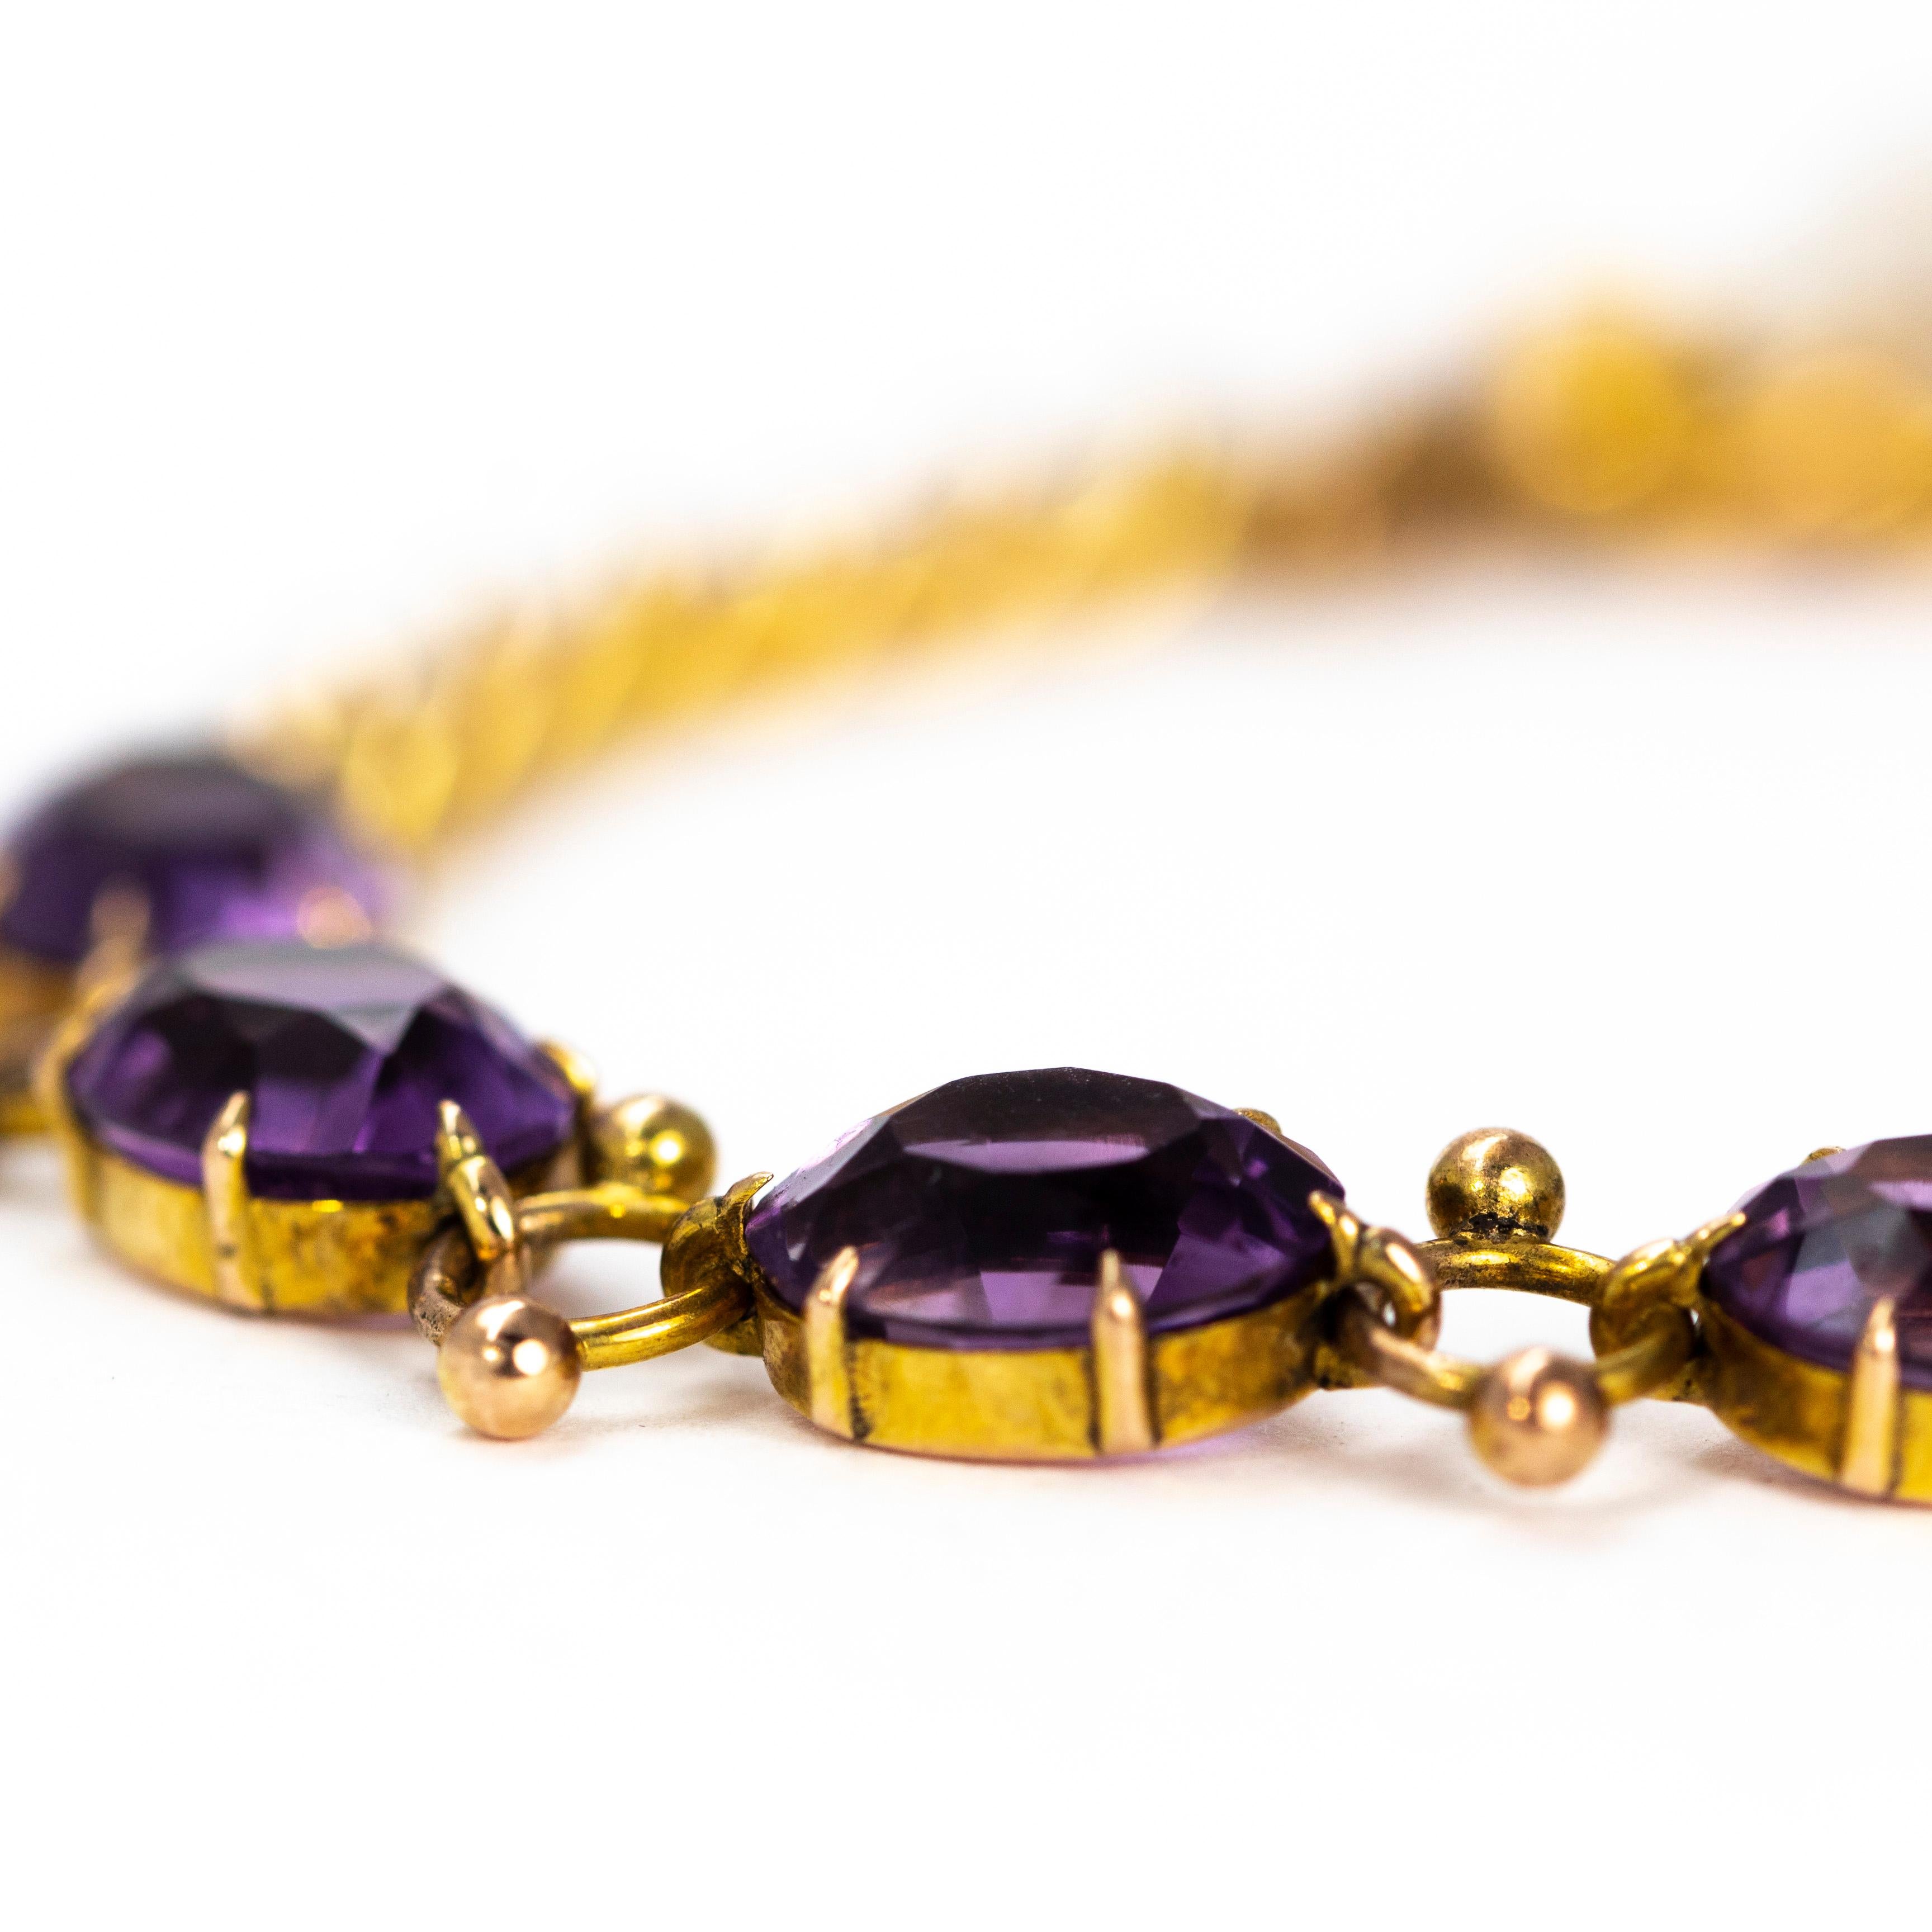 The stones in this bracelet are a gorgeously rich purple colour. They are set in simple claw settings and are connected with orb detailed links. The other half of this bracelet is made up classic curb links. 

Length: 7inches
Stone Dimensions: 7x